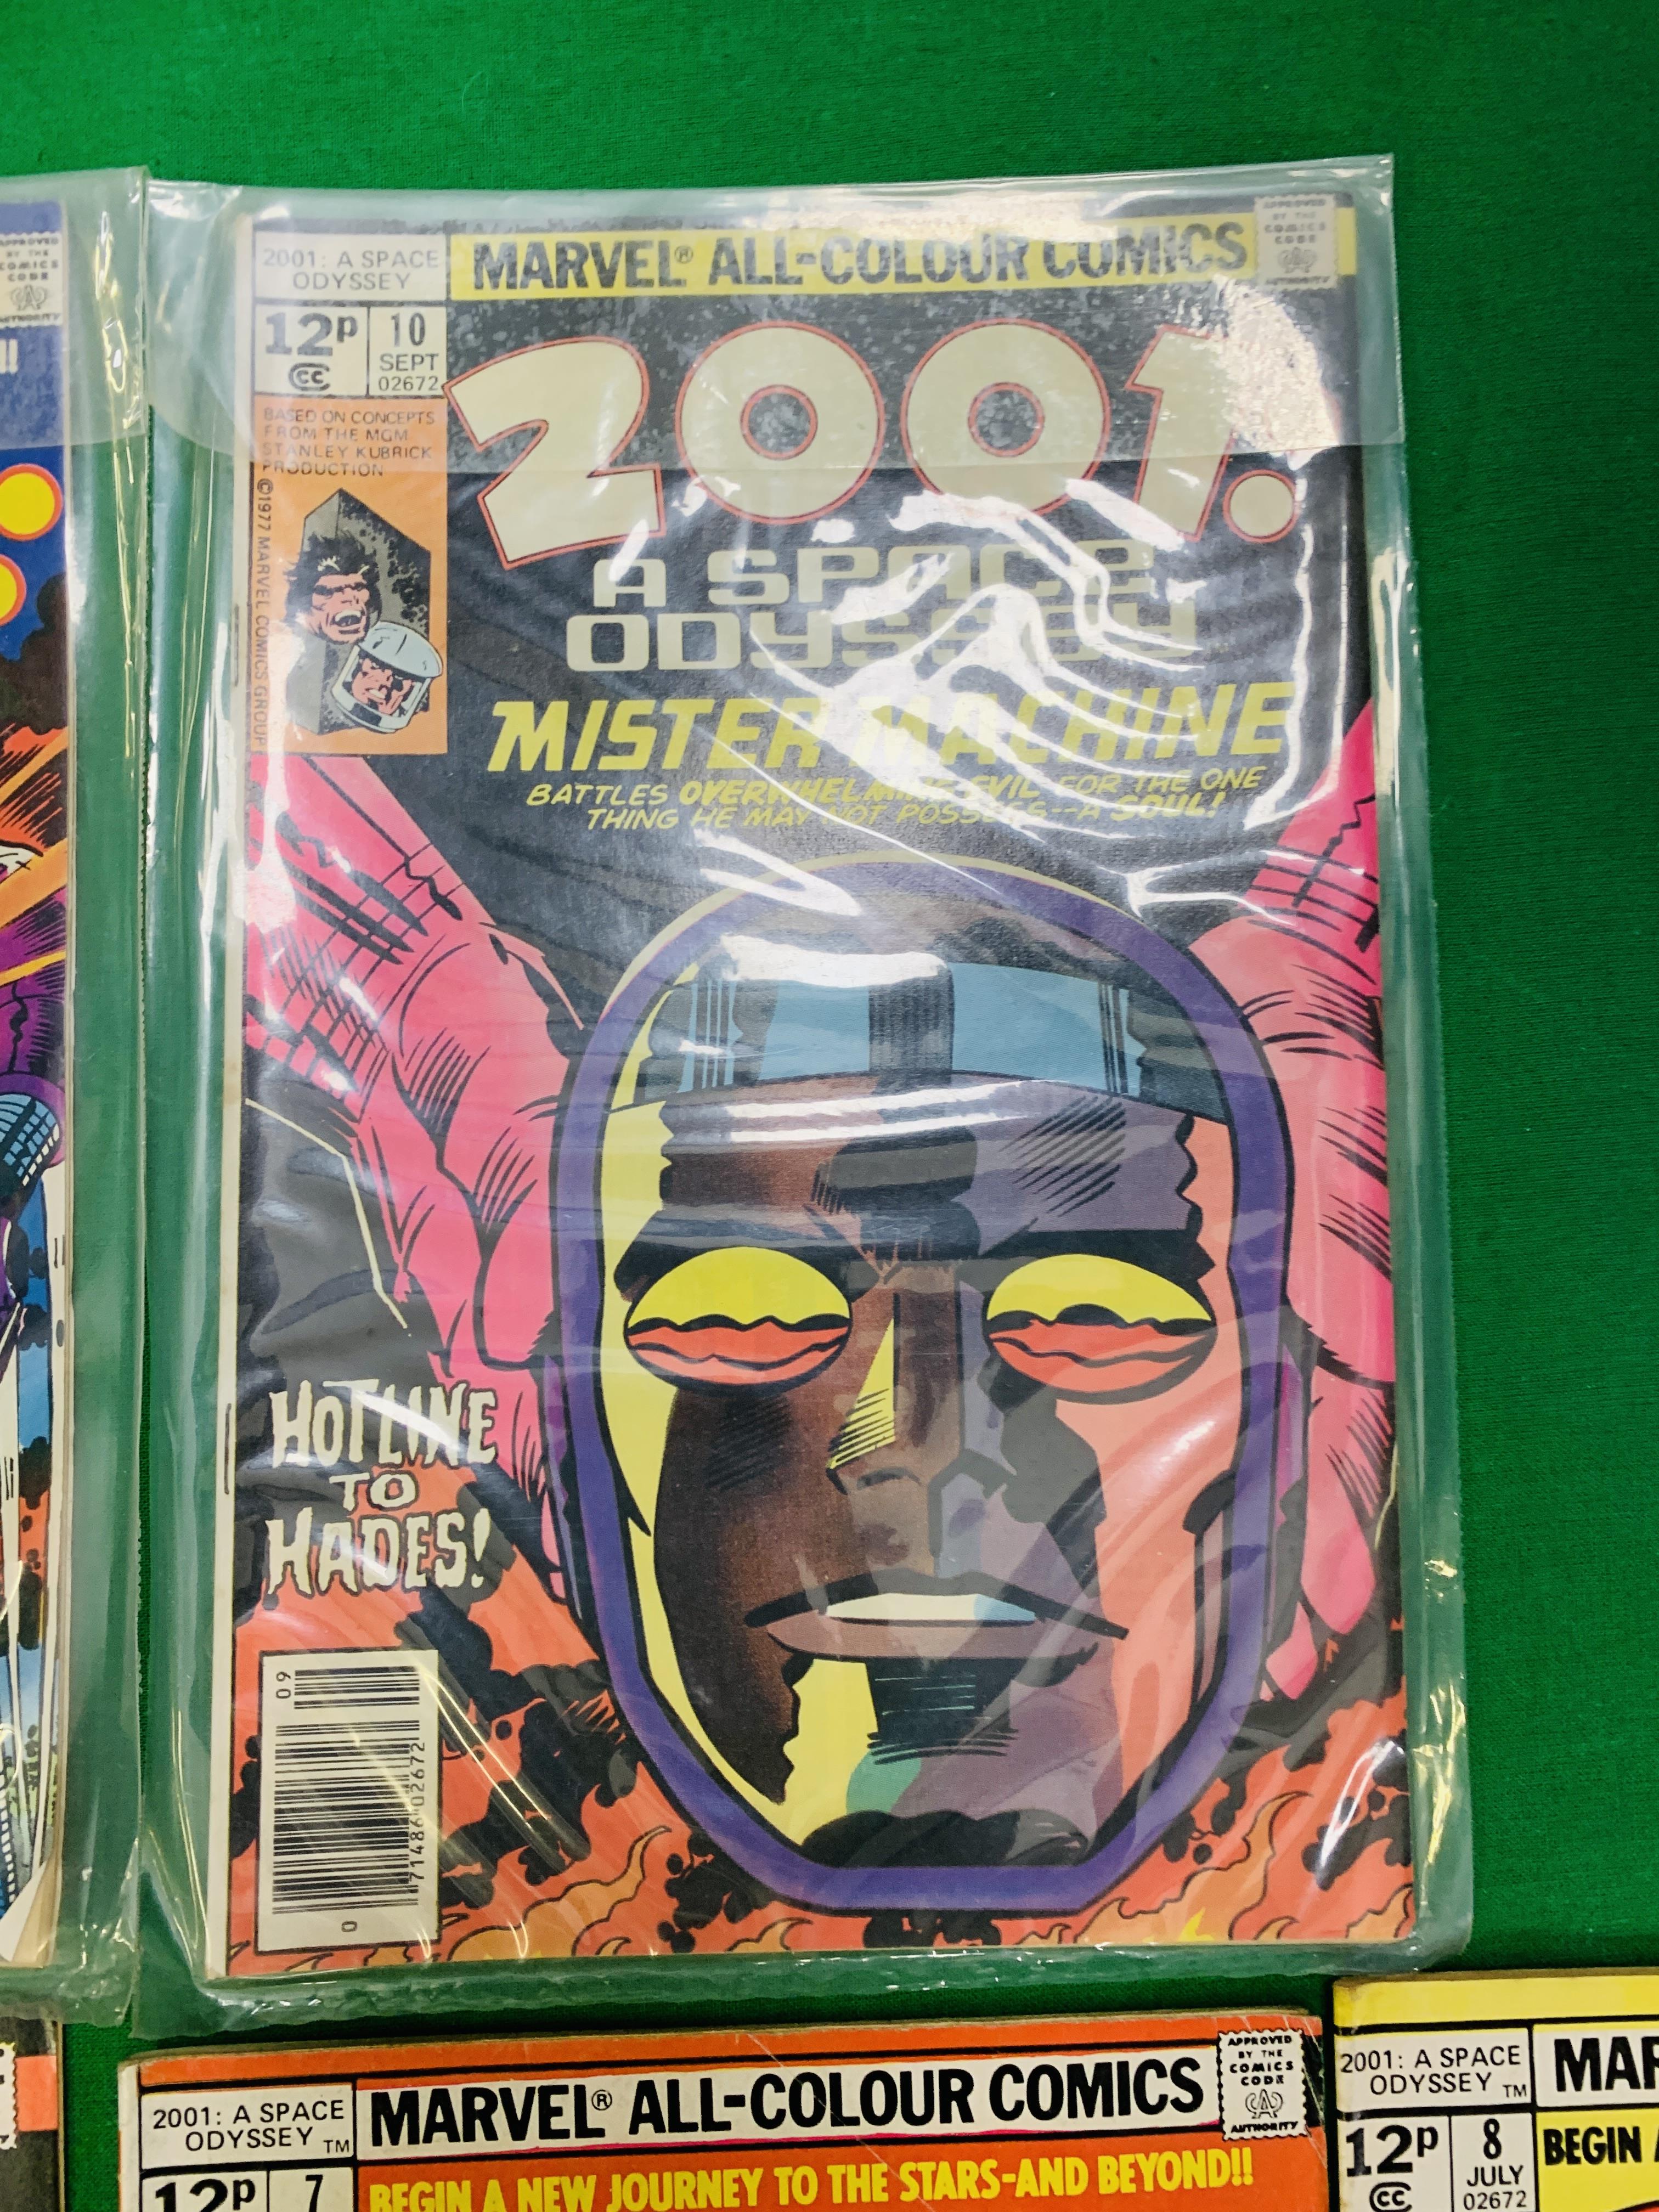 MARVEL COMICS 2001: A SPACE ODYSSEY NO. 1 - 10 FROM 1976, FIRST APPEARANCE NO. 8. MACHINE MAN X-51. - Image 11 of 11